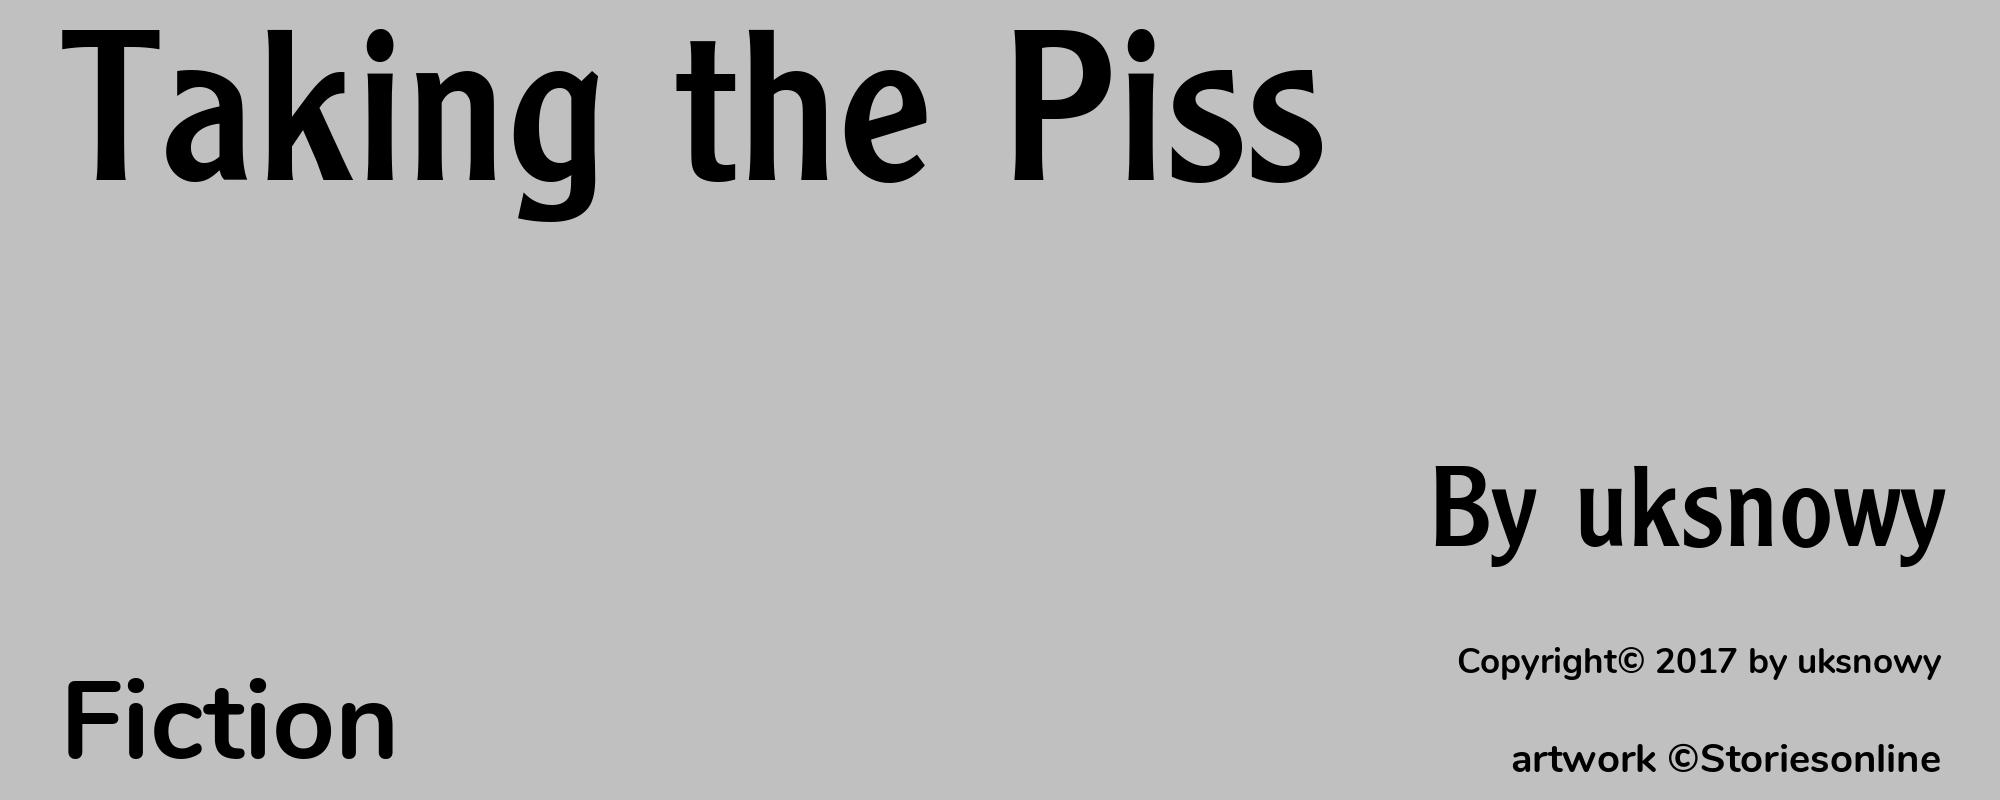 Taking the Piss - Cover